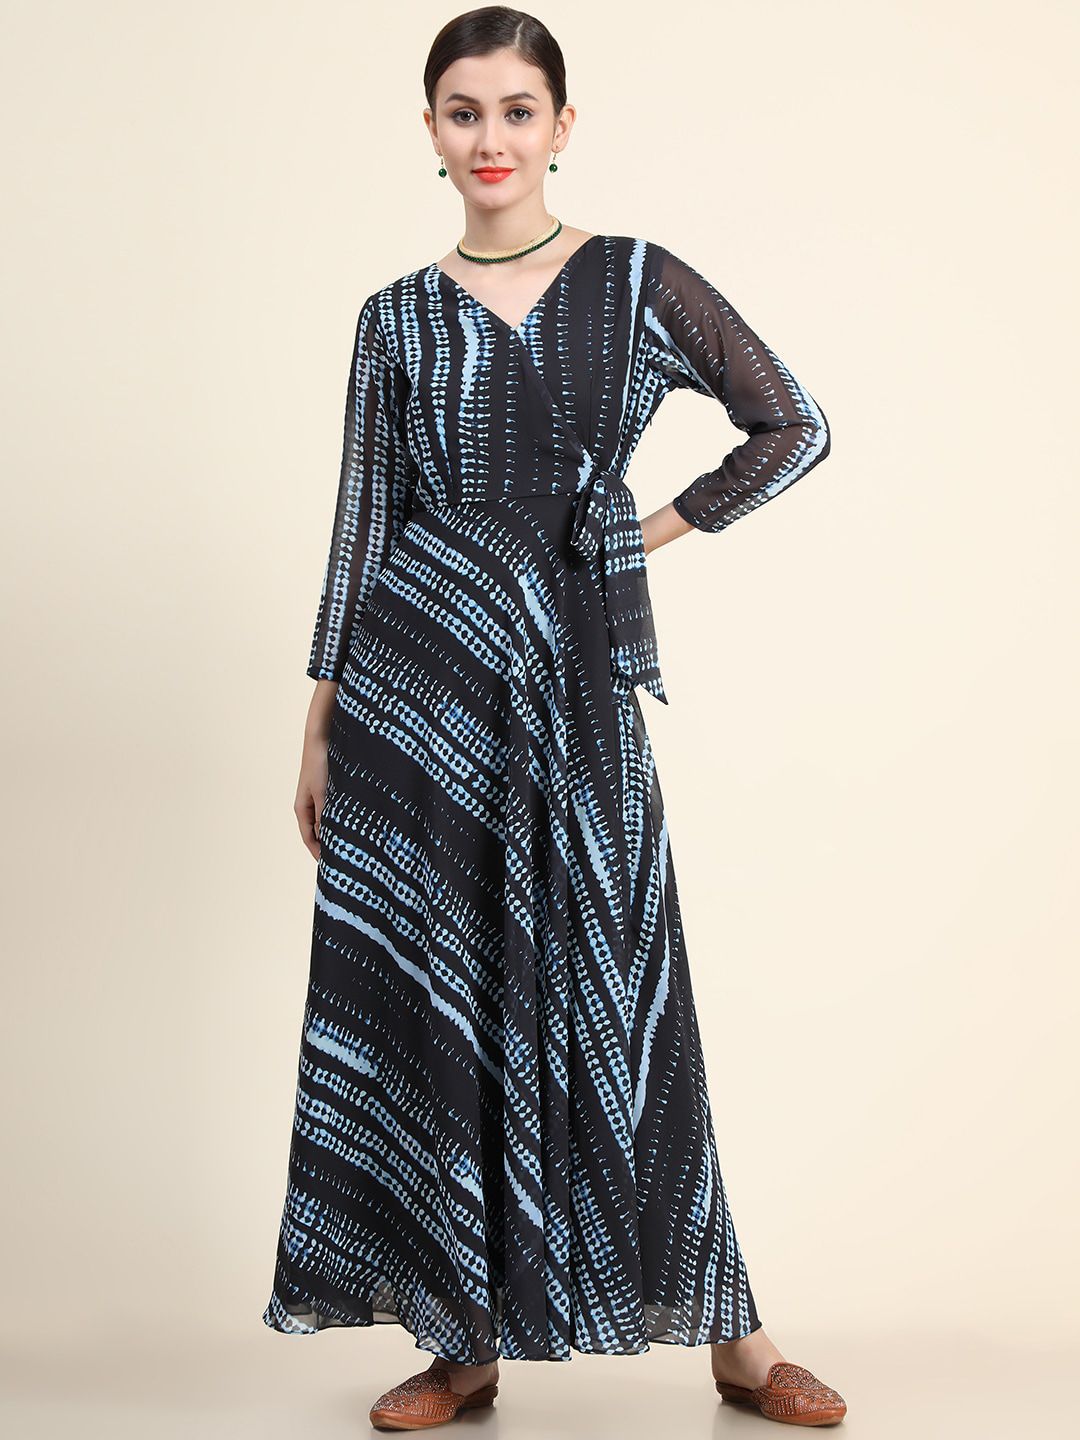 KALINI Tie And Dye Printed Fit & Flare Maxi Dresses Price in India